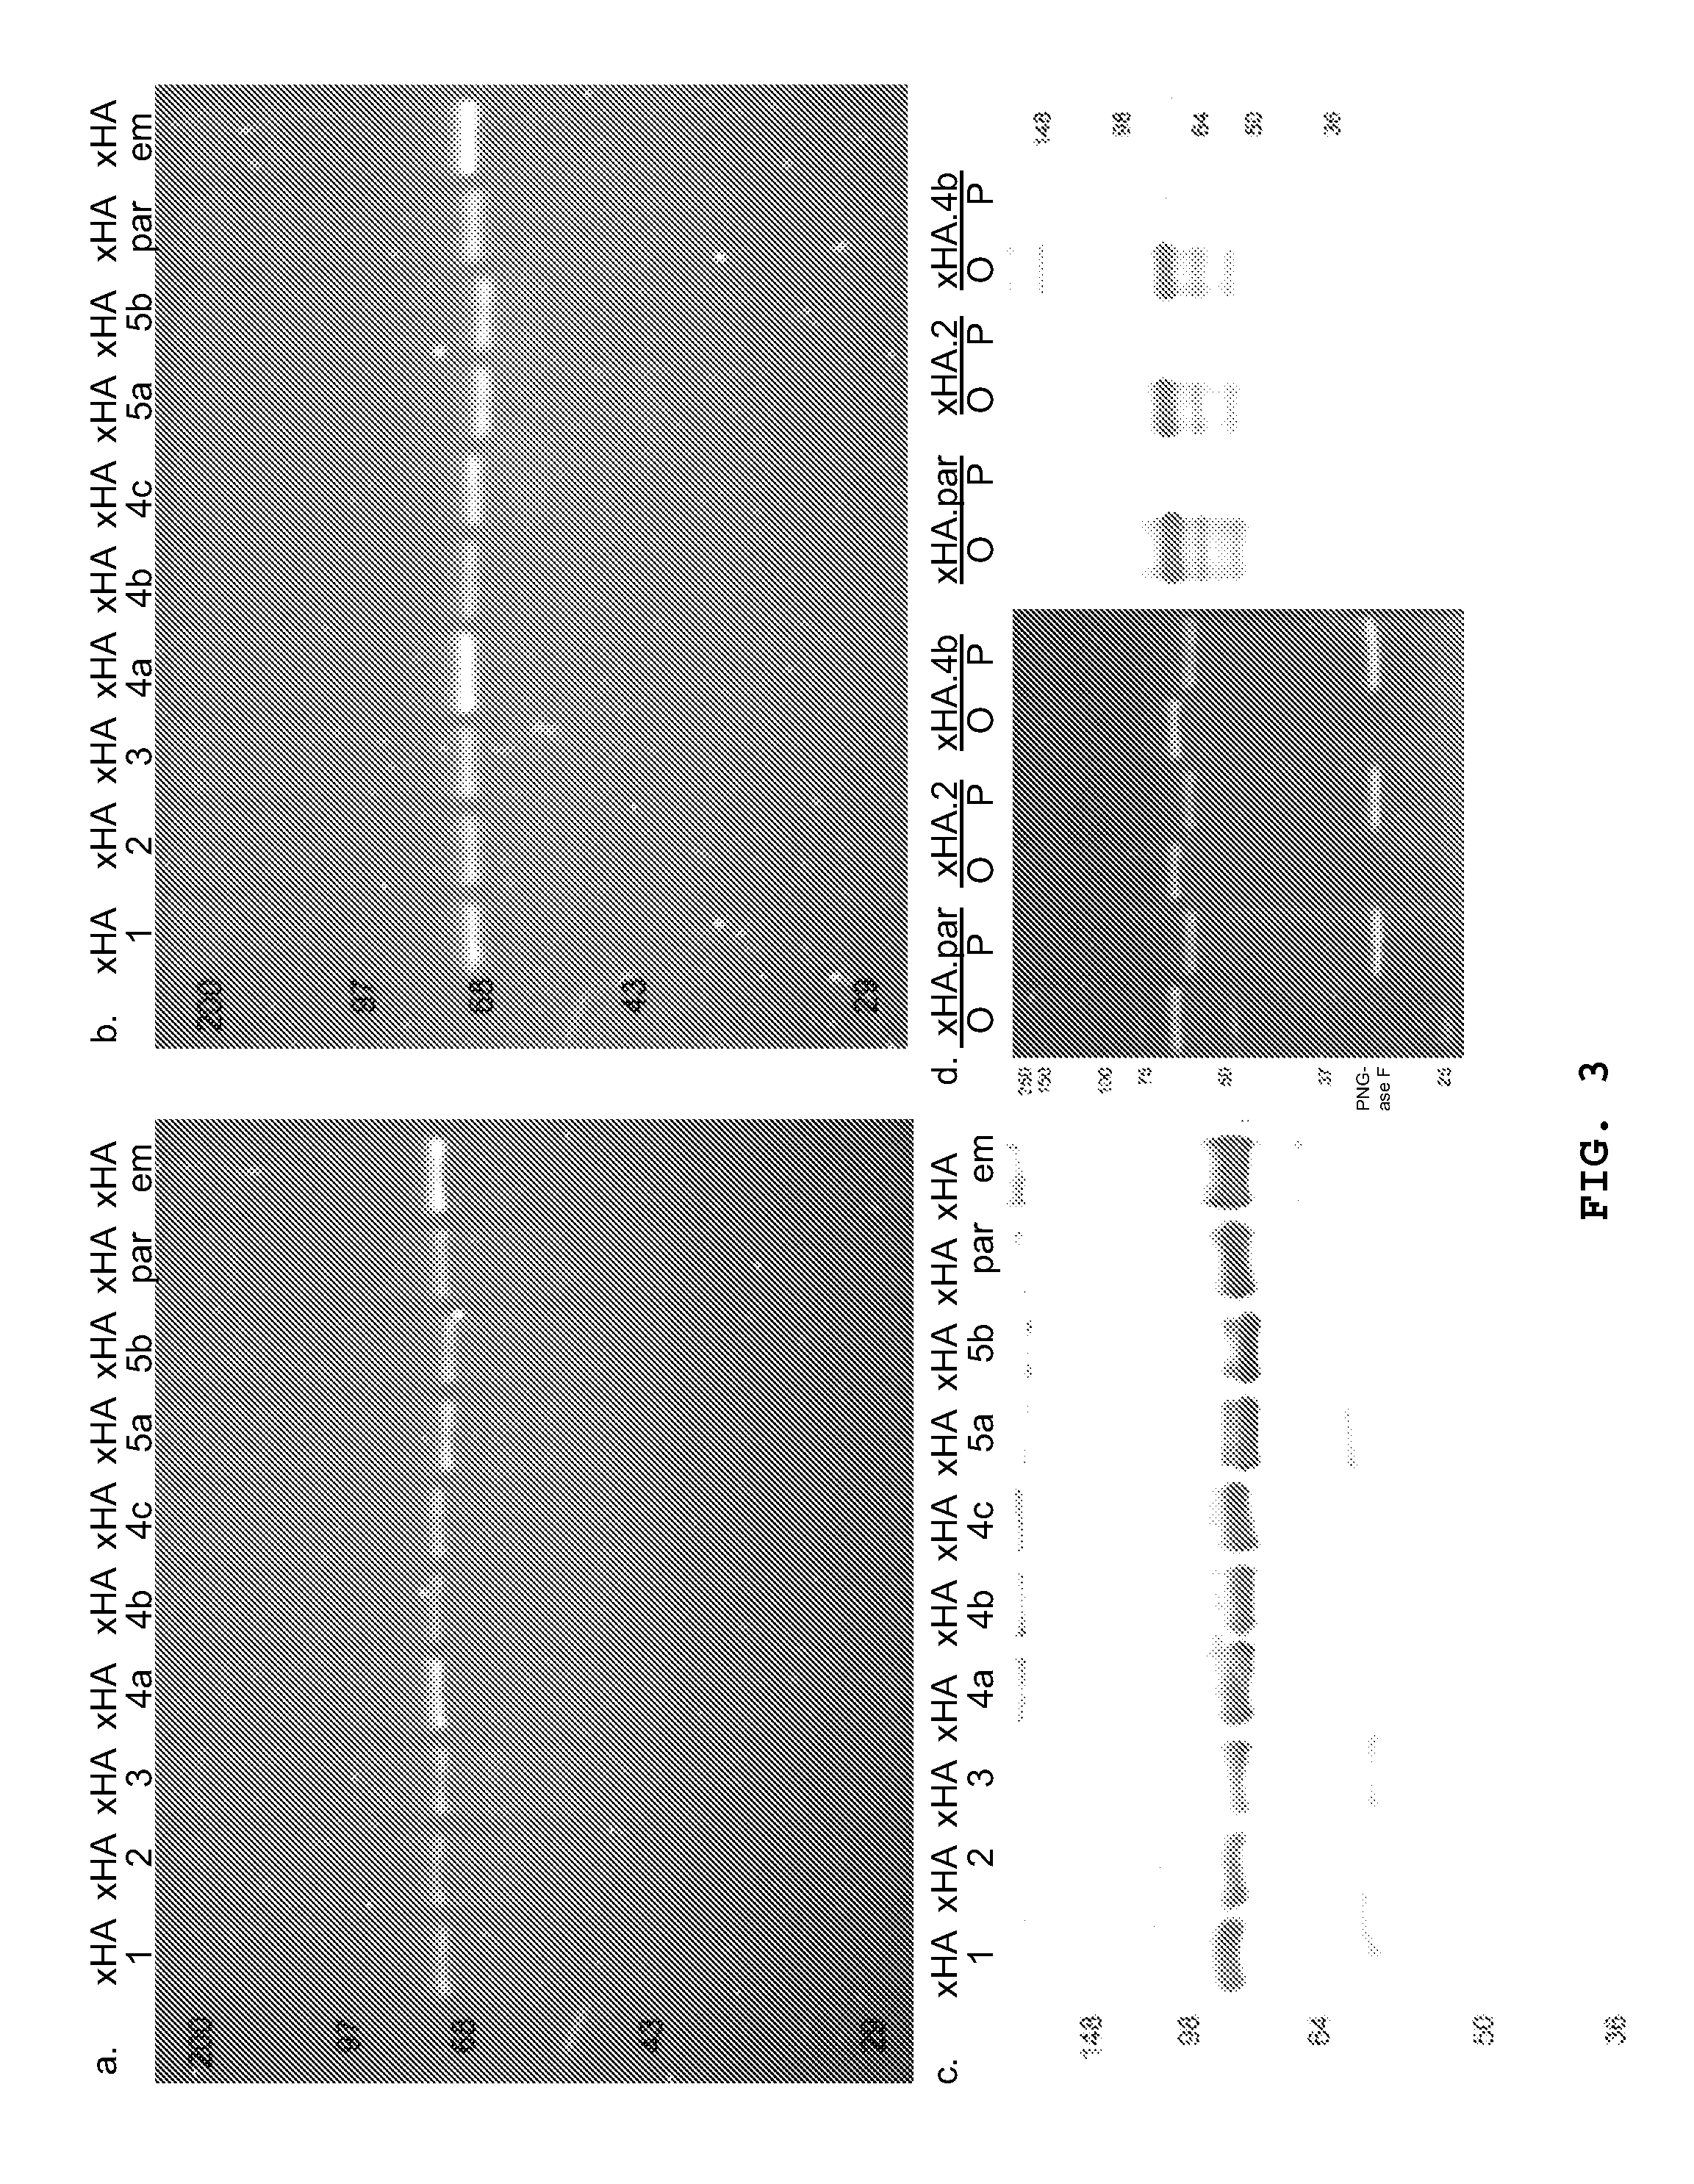 Vaccine antigens that direct immunity to conserved epitopes